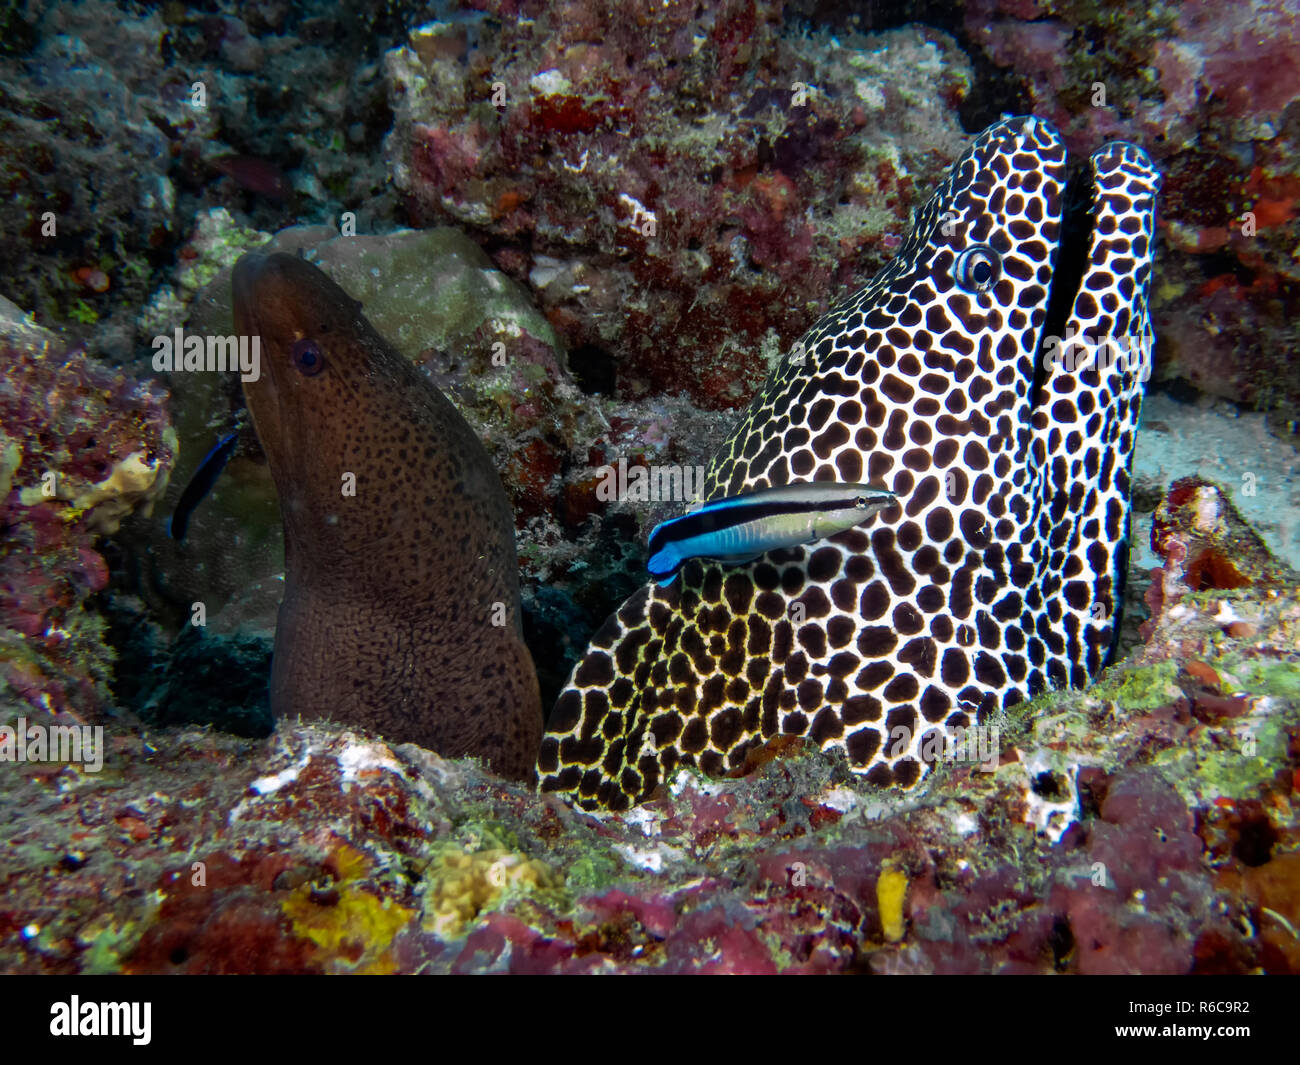 A Honeycomb Moray (Gymnothorax favagineus) being attended to by a Bluestreak Cleaner Wrasse (Labroides dimidiatus) in the Indian Ocean Stock Photo